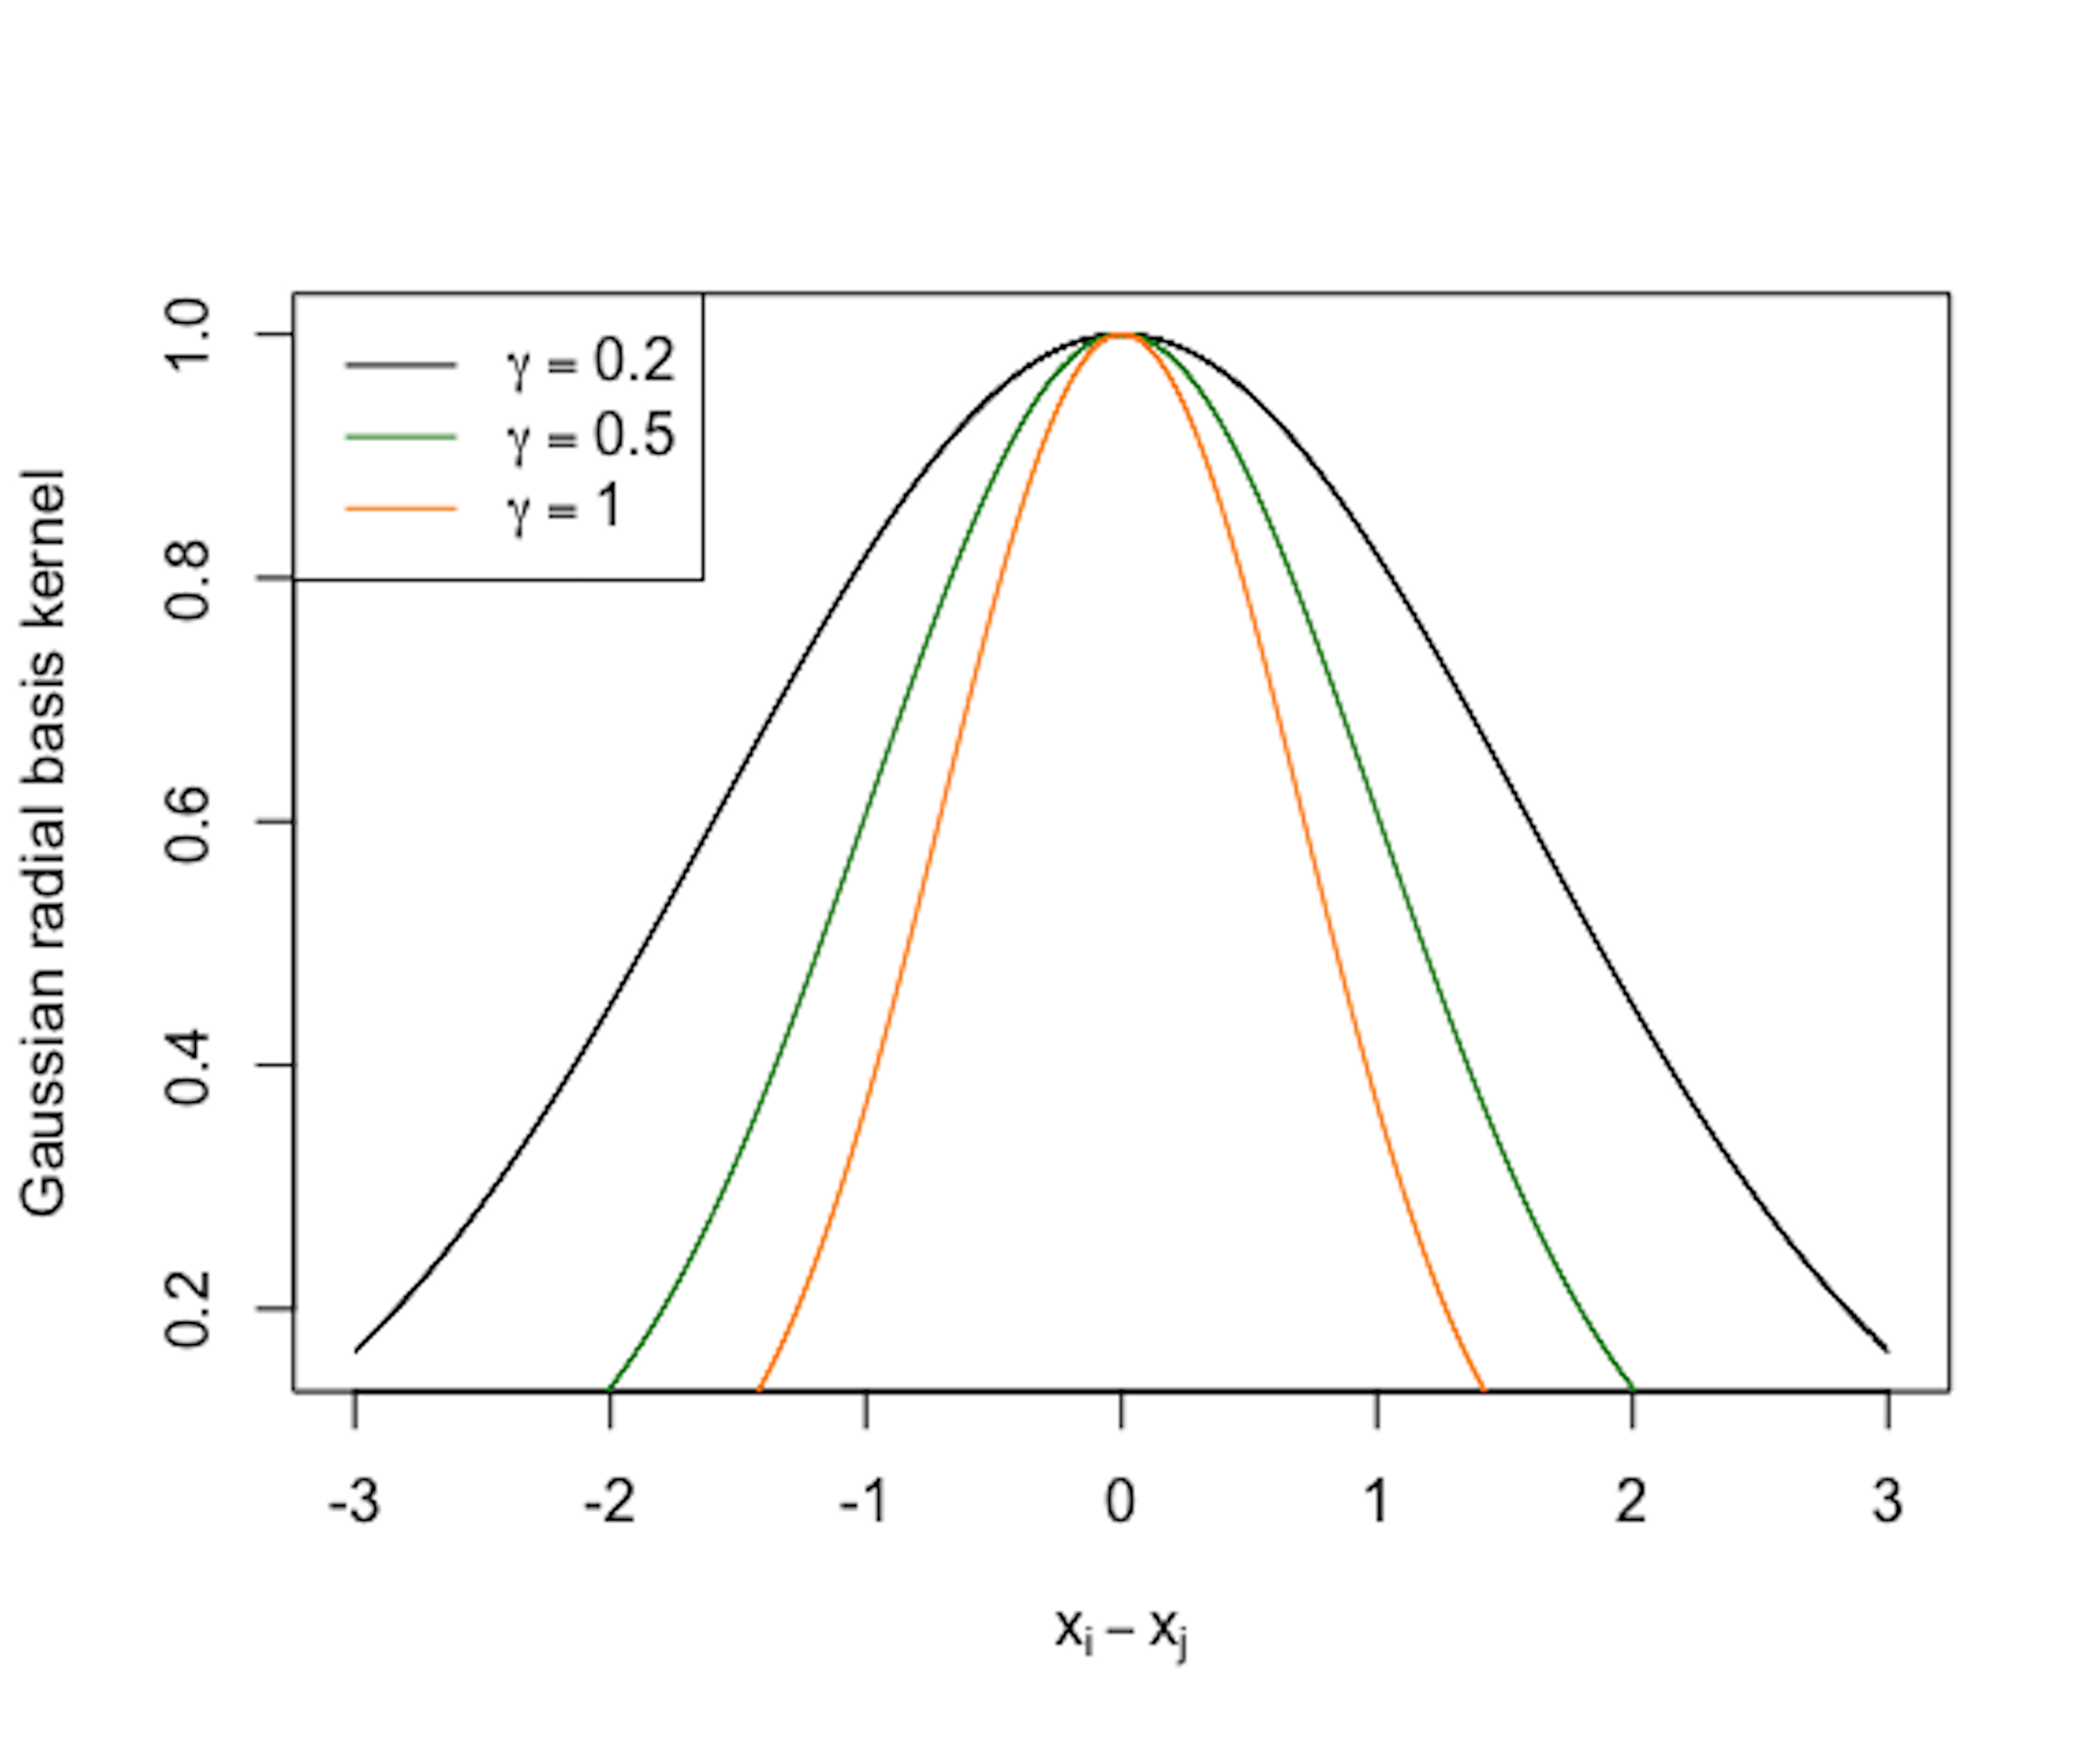 Three instances of the *Gaussian radial basis* kernel function ($\gamma=0.2$, $\gamma=0.5$, and $\gamma=1$)